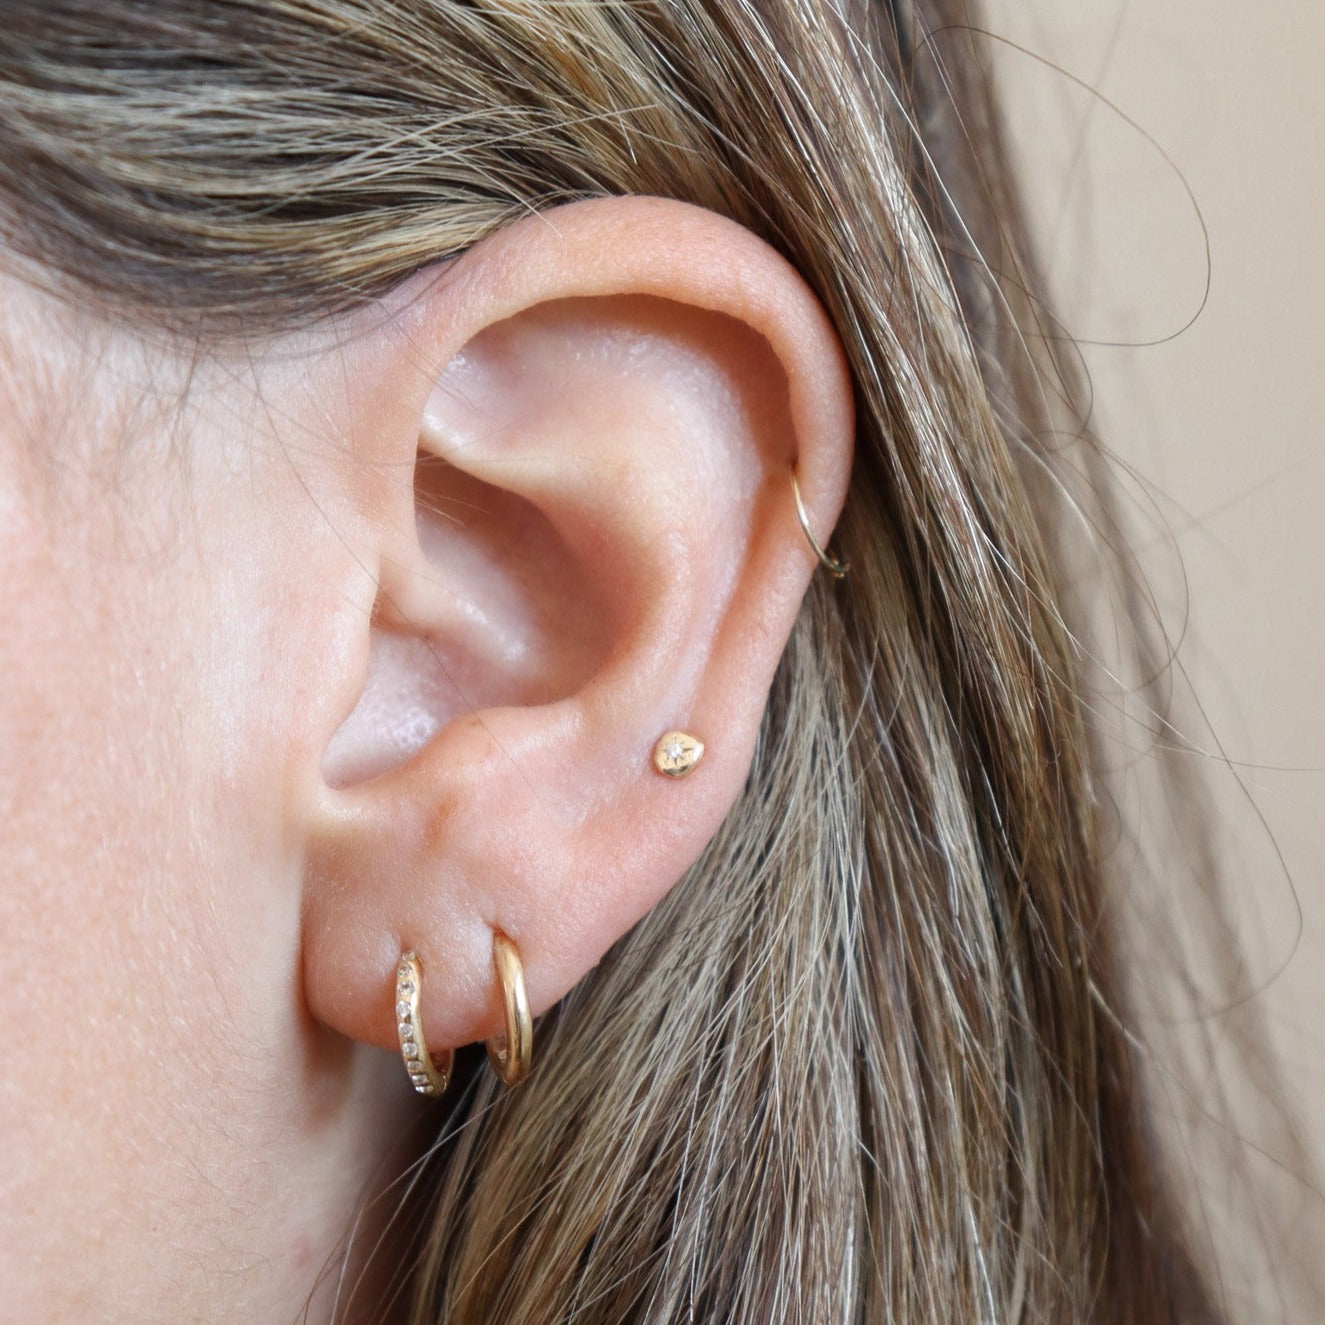 Multiple 14k gold earrings are worn, the top is a thin hoop, middle is a circle stud with a diamond set in the center, then two versions of a huggie hoop.